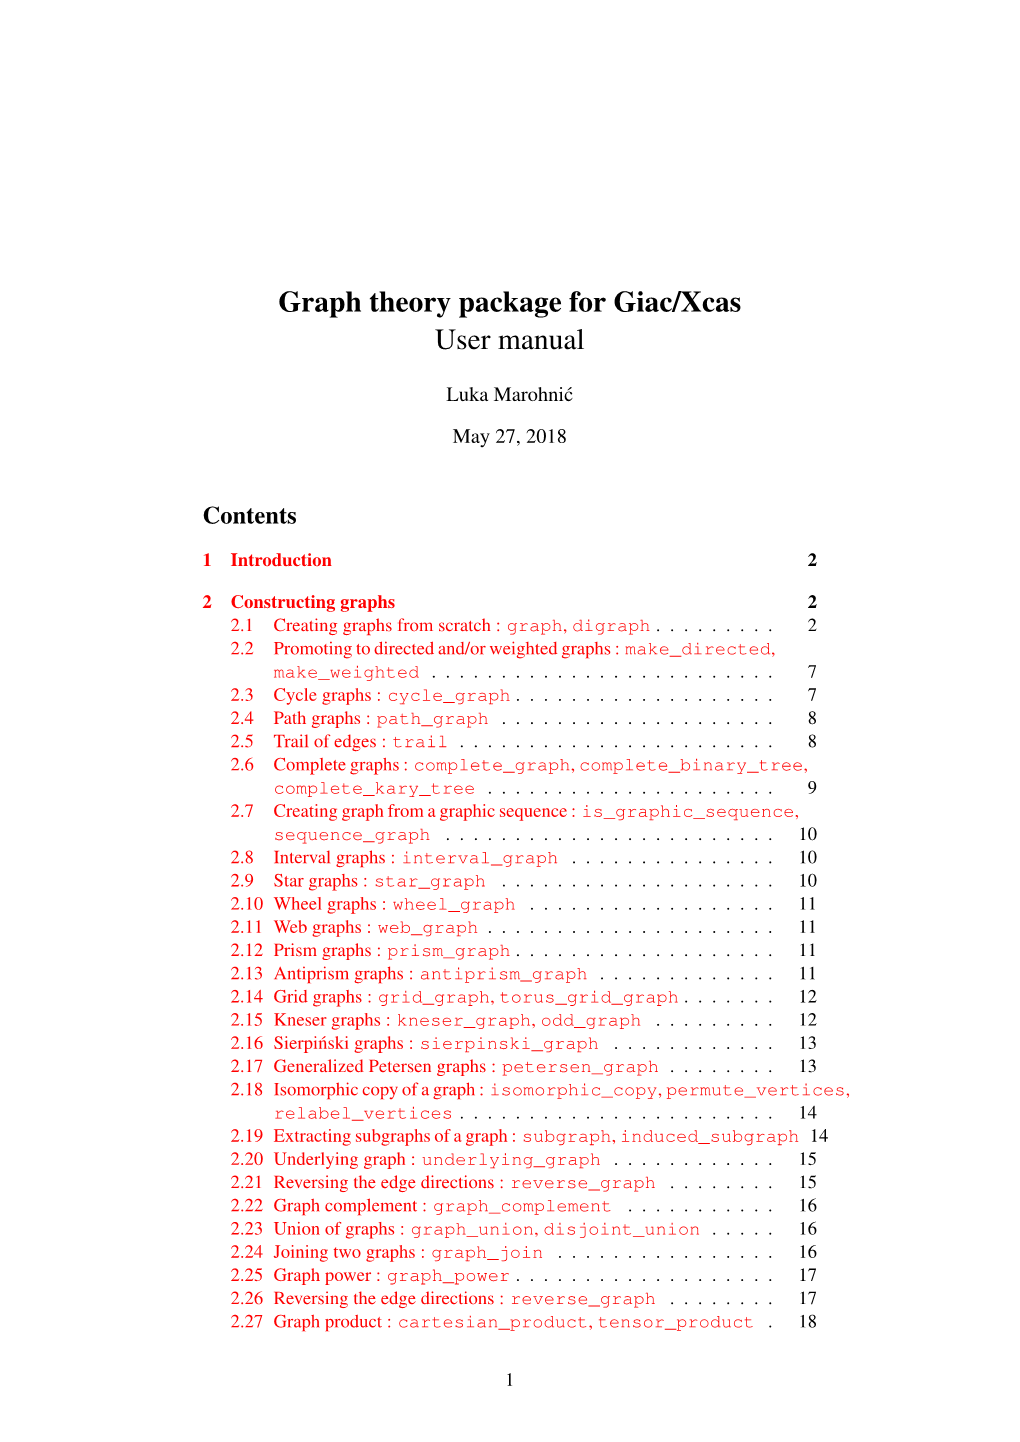 Graph Theory Package for Giac/Xcas User Manual